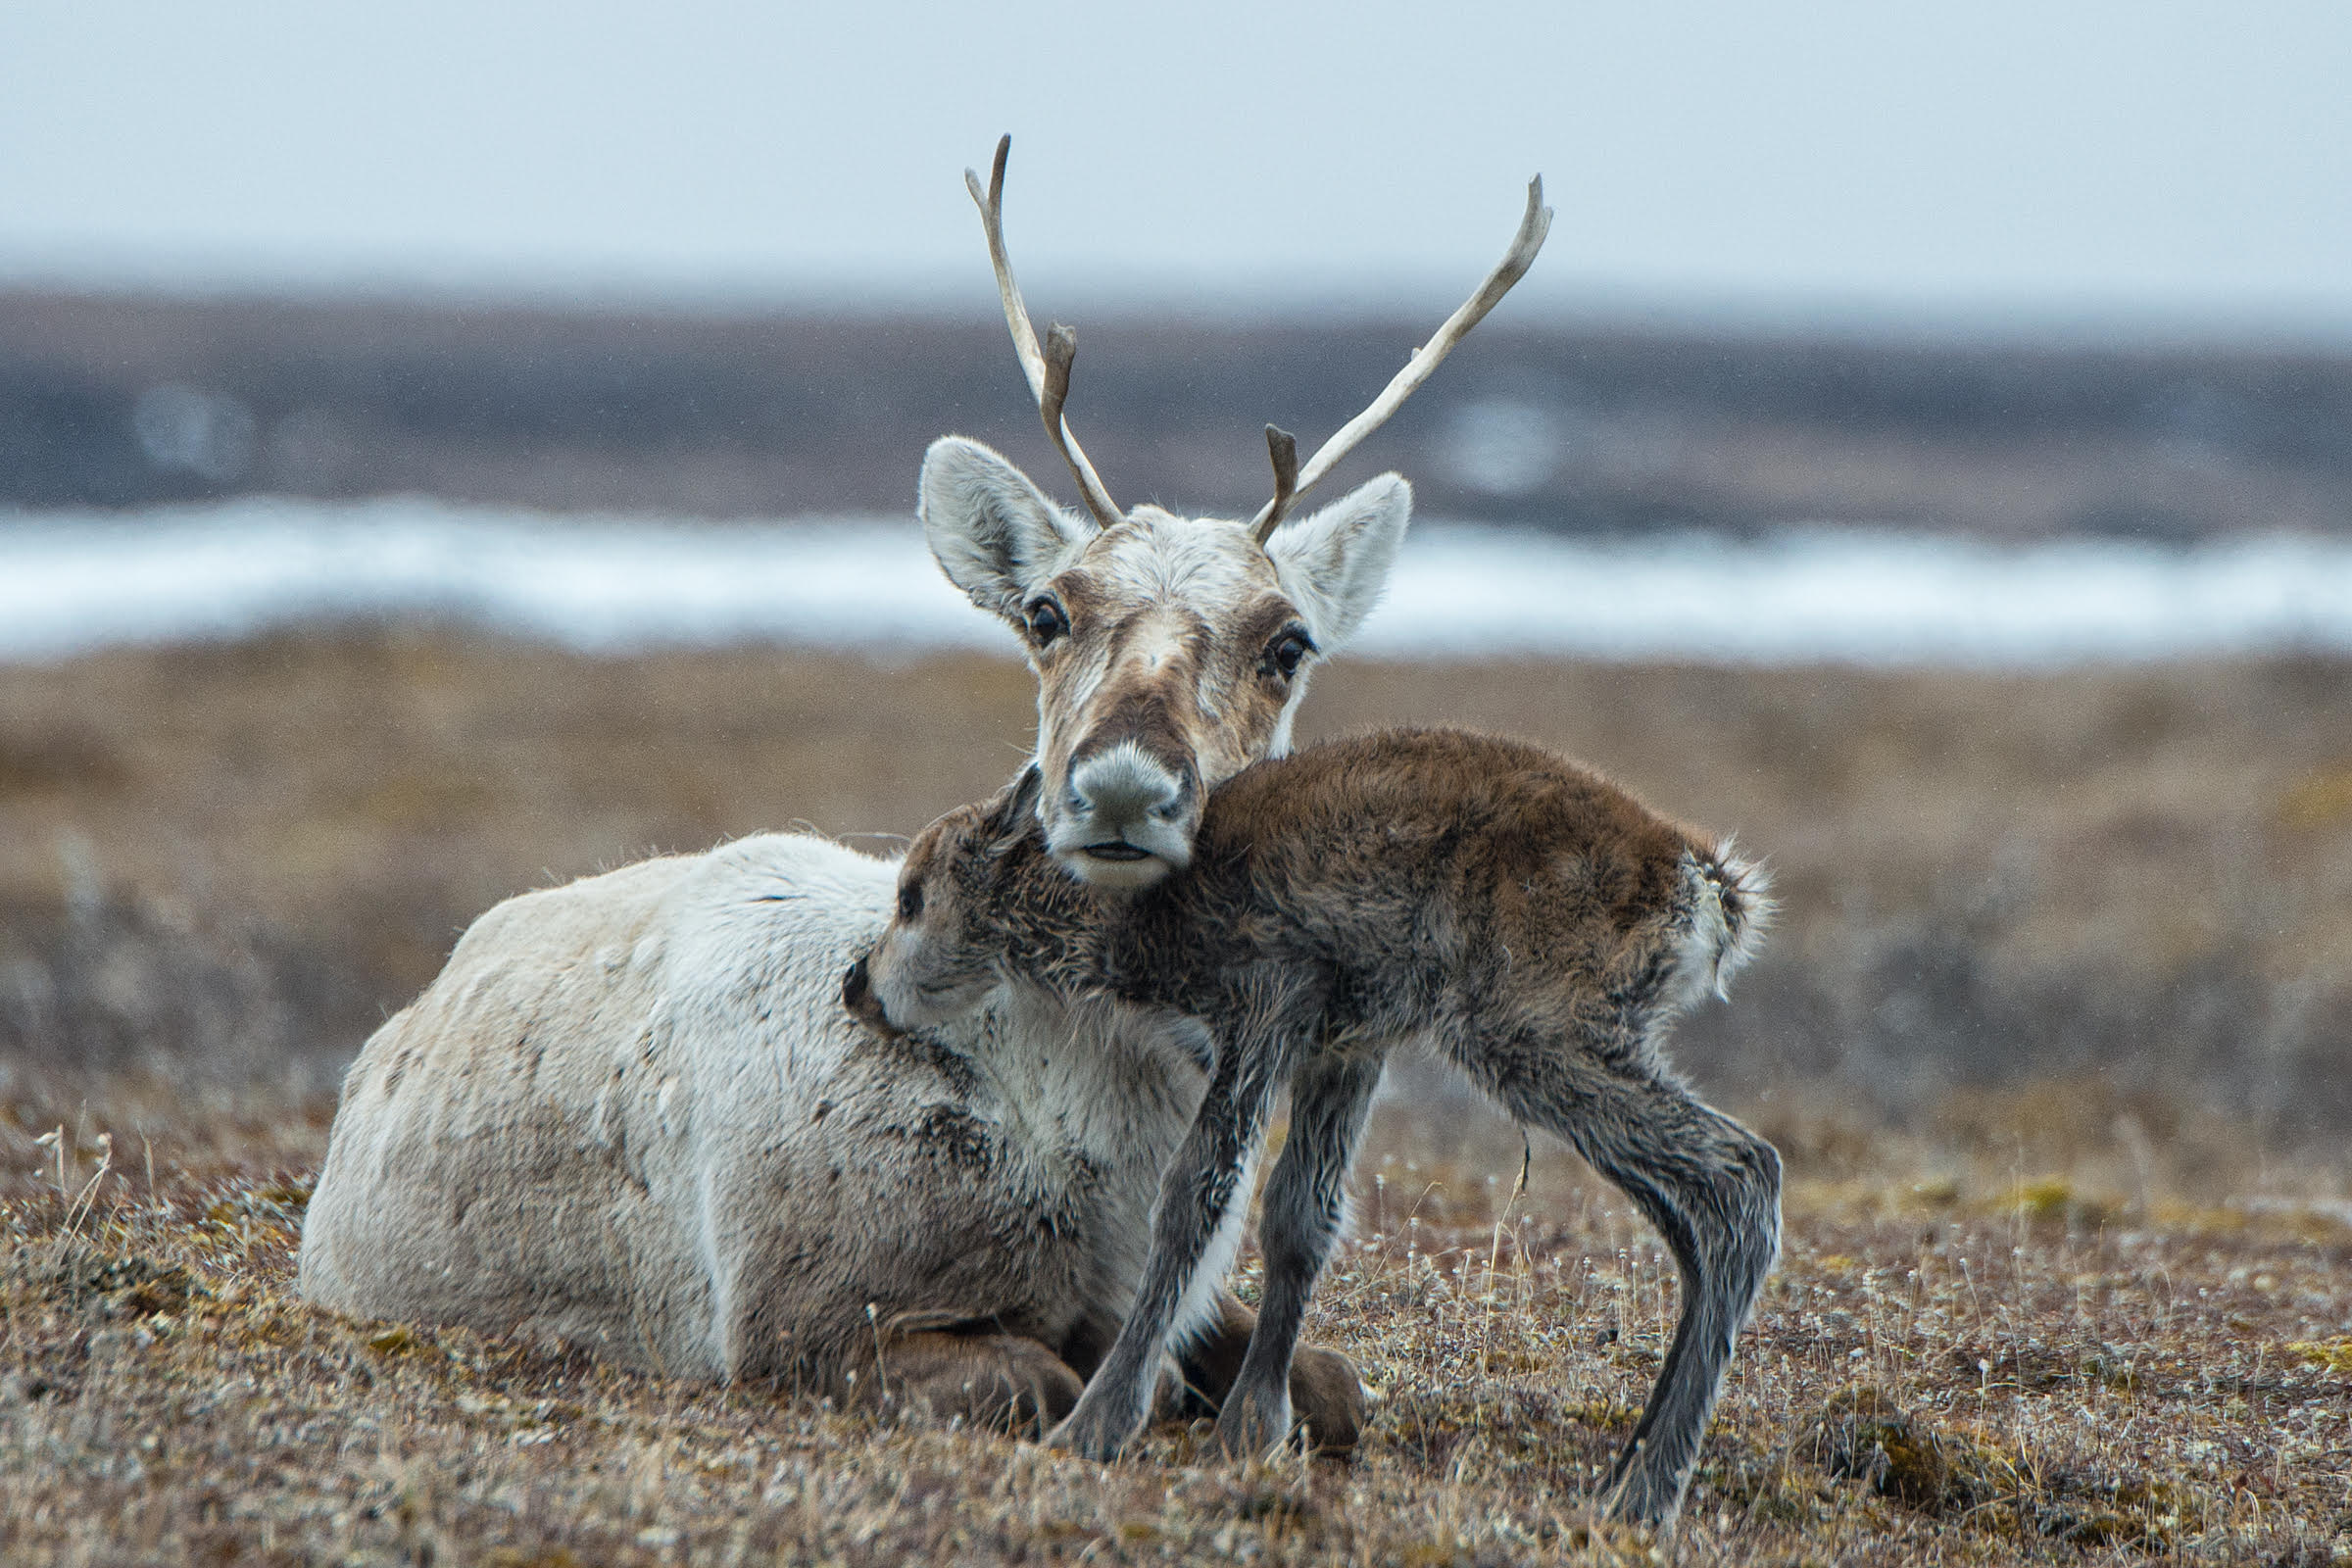 Porcupine caribou and calf by Peter Mather